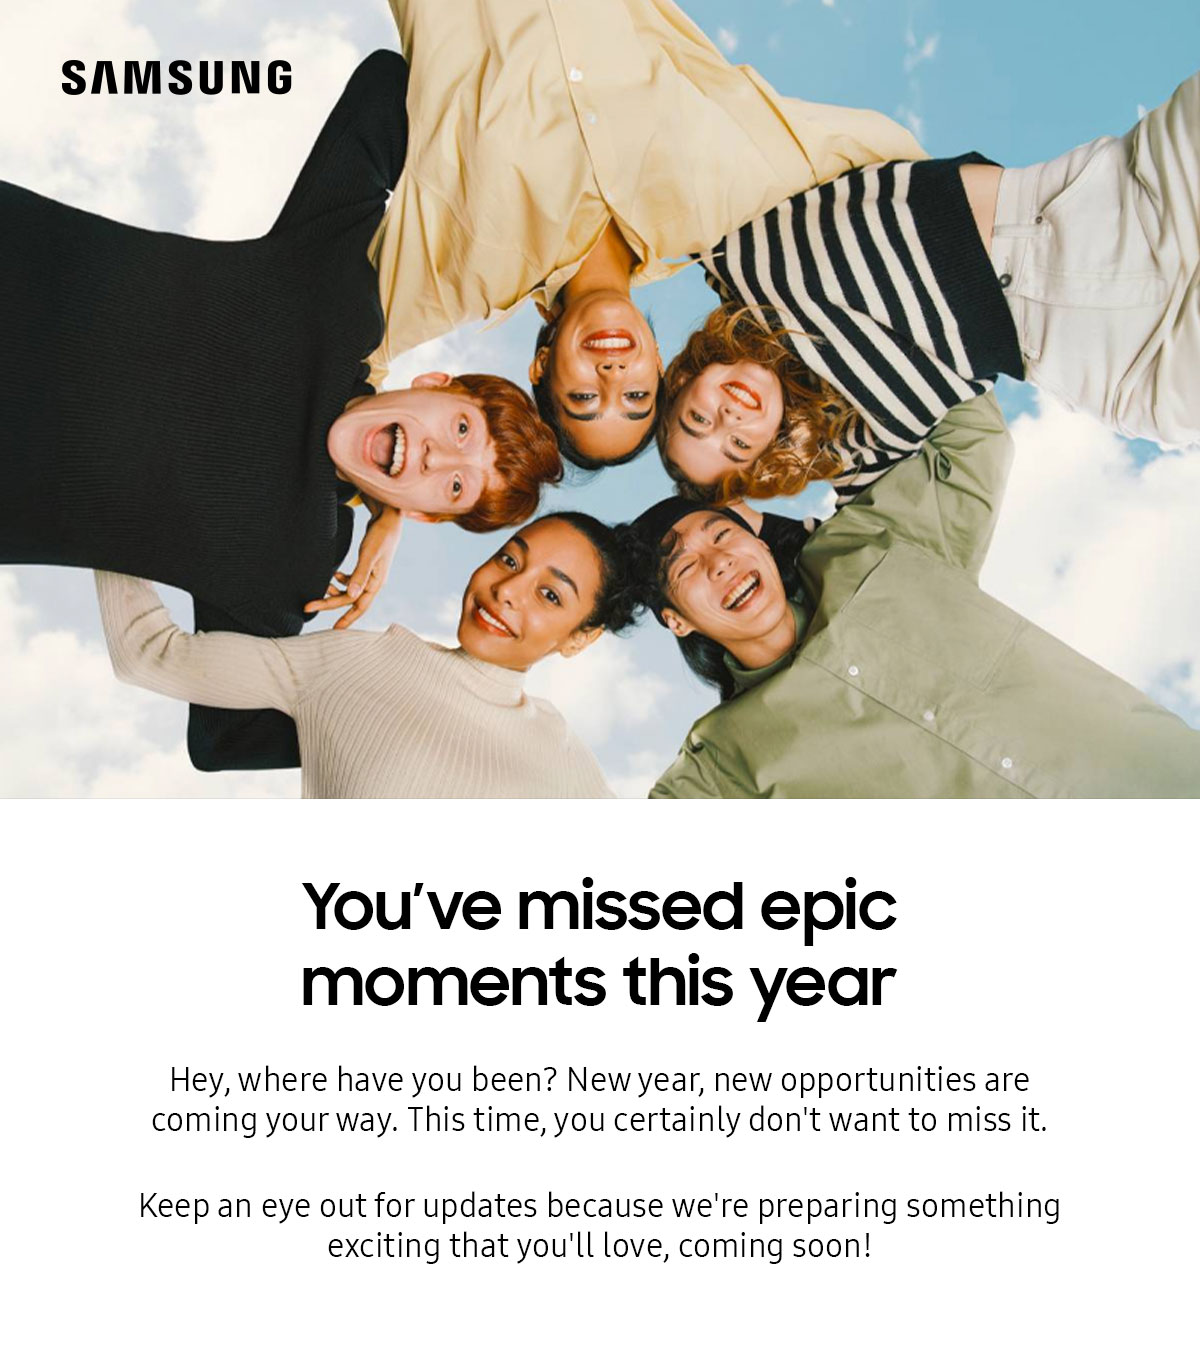 You've missed epic moments this year | Hey, where have you been? New year, new opportunities are coming your way. This time, you certainly don't want to miss it. Keep an eye out for updates because we're preparing something exciting that you'll love, coming soon!